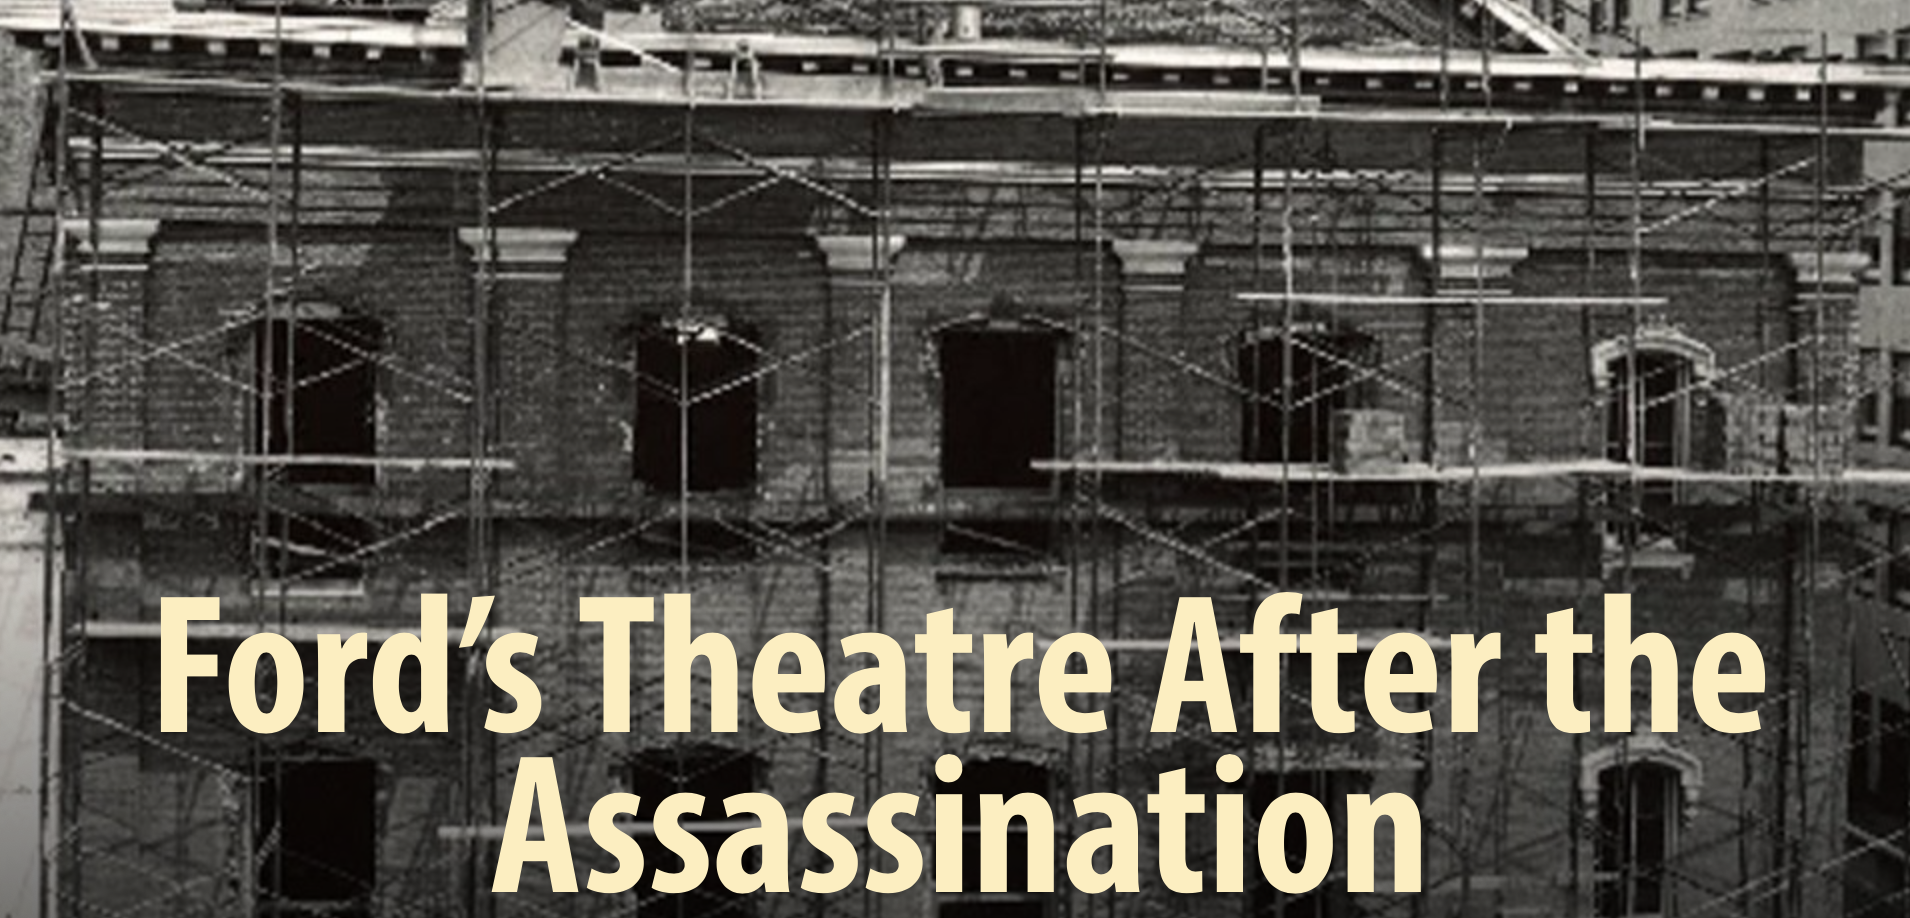 Ford’s Theatre After the Assassination 6.17